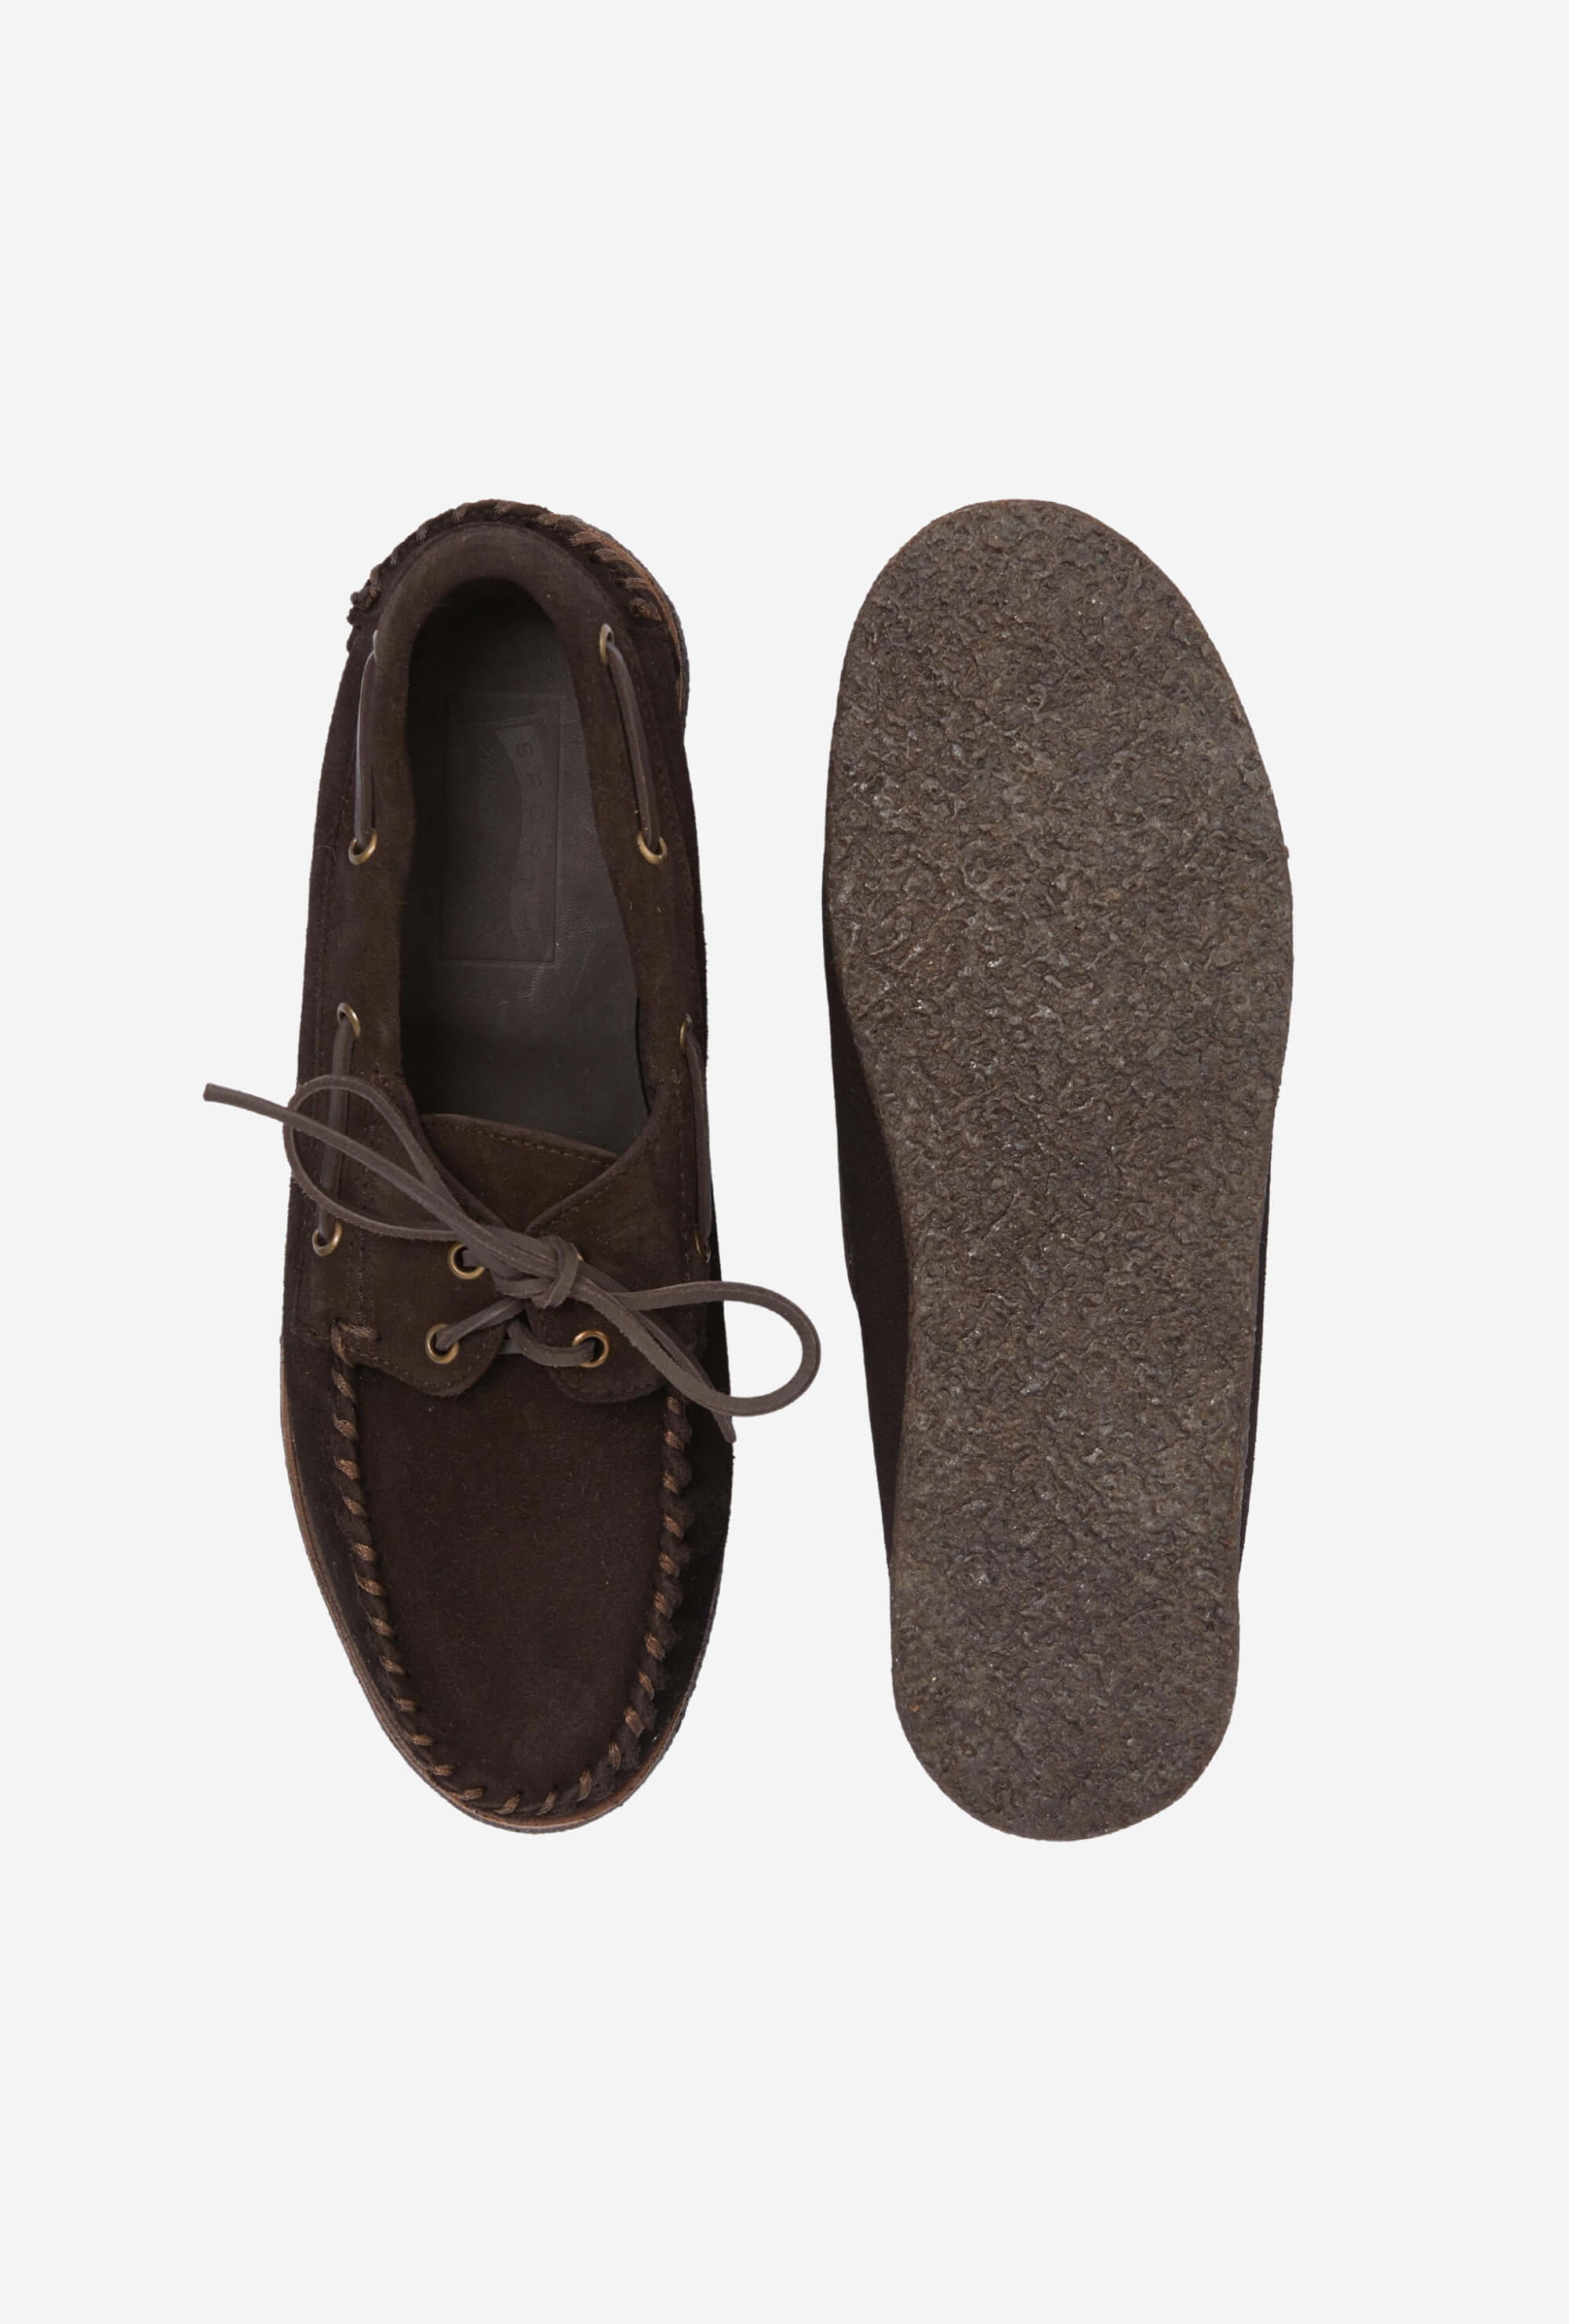 Boat Shoes Brown Suede